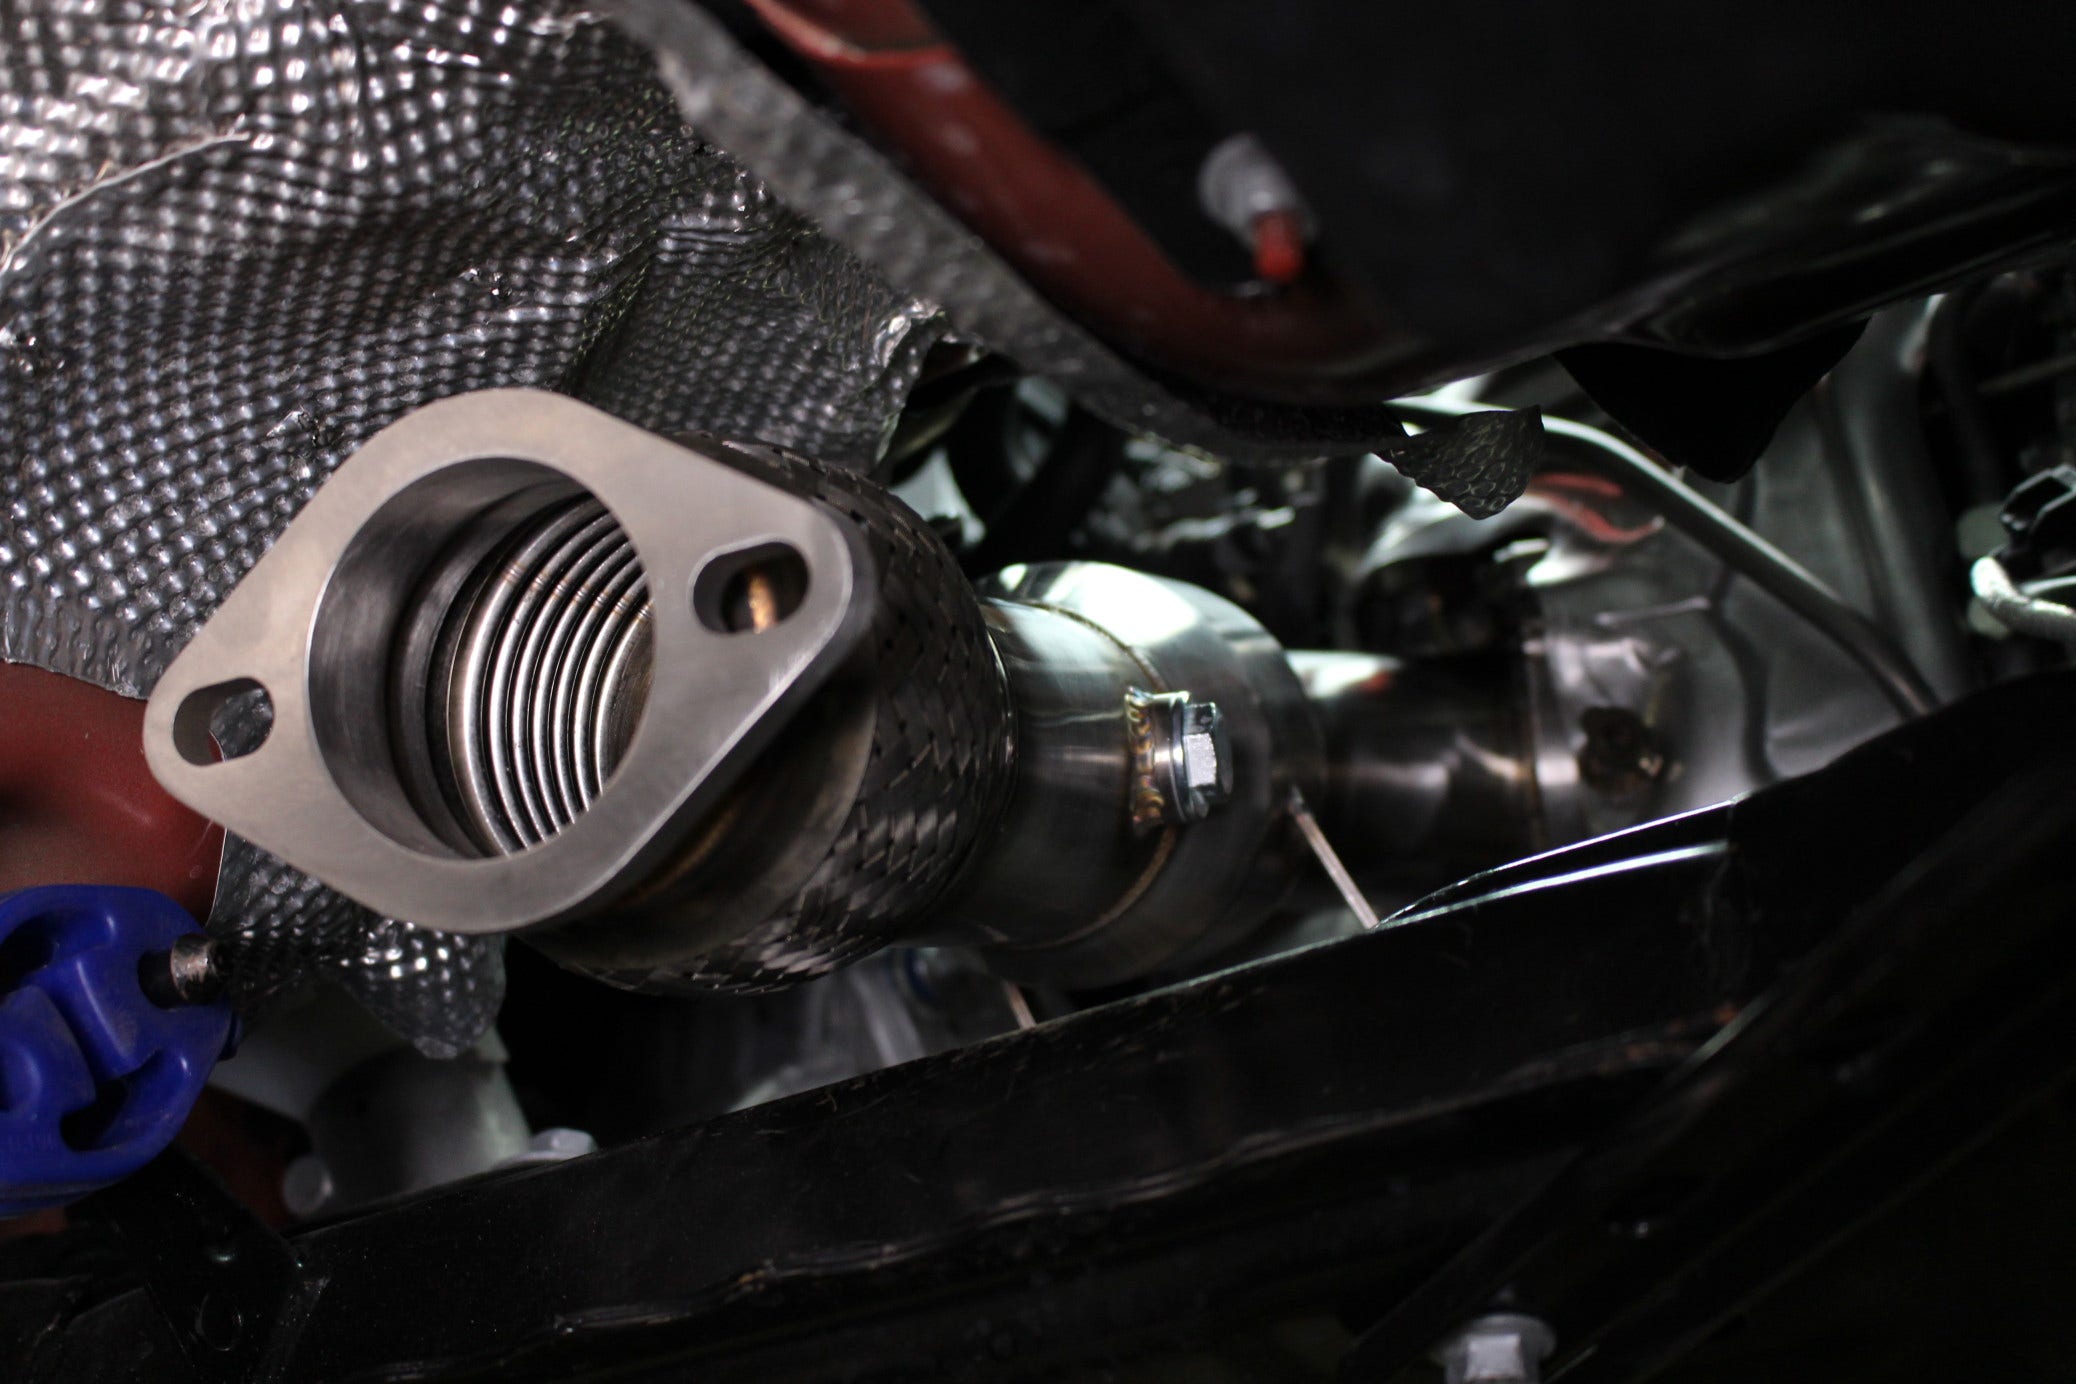 Downpipe for What - Fiesta ST Downpipe R&D, Part 3: Final Prototype